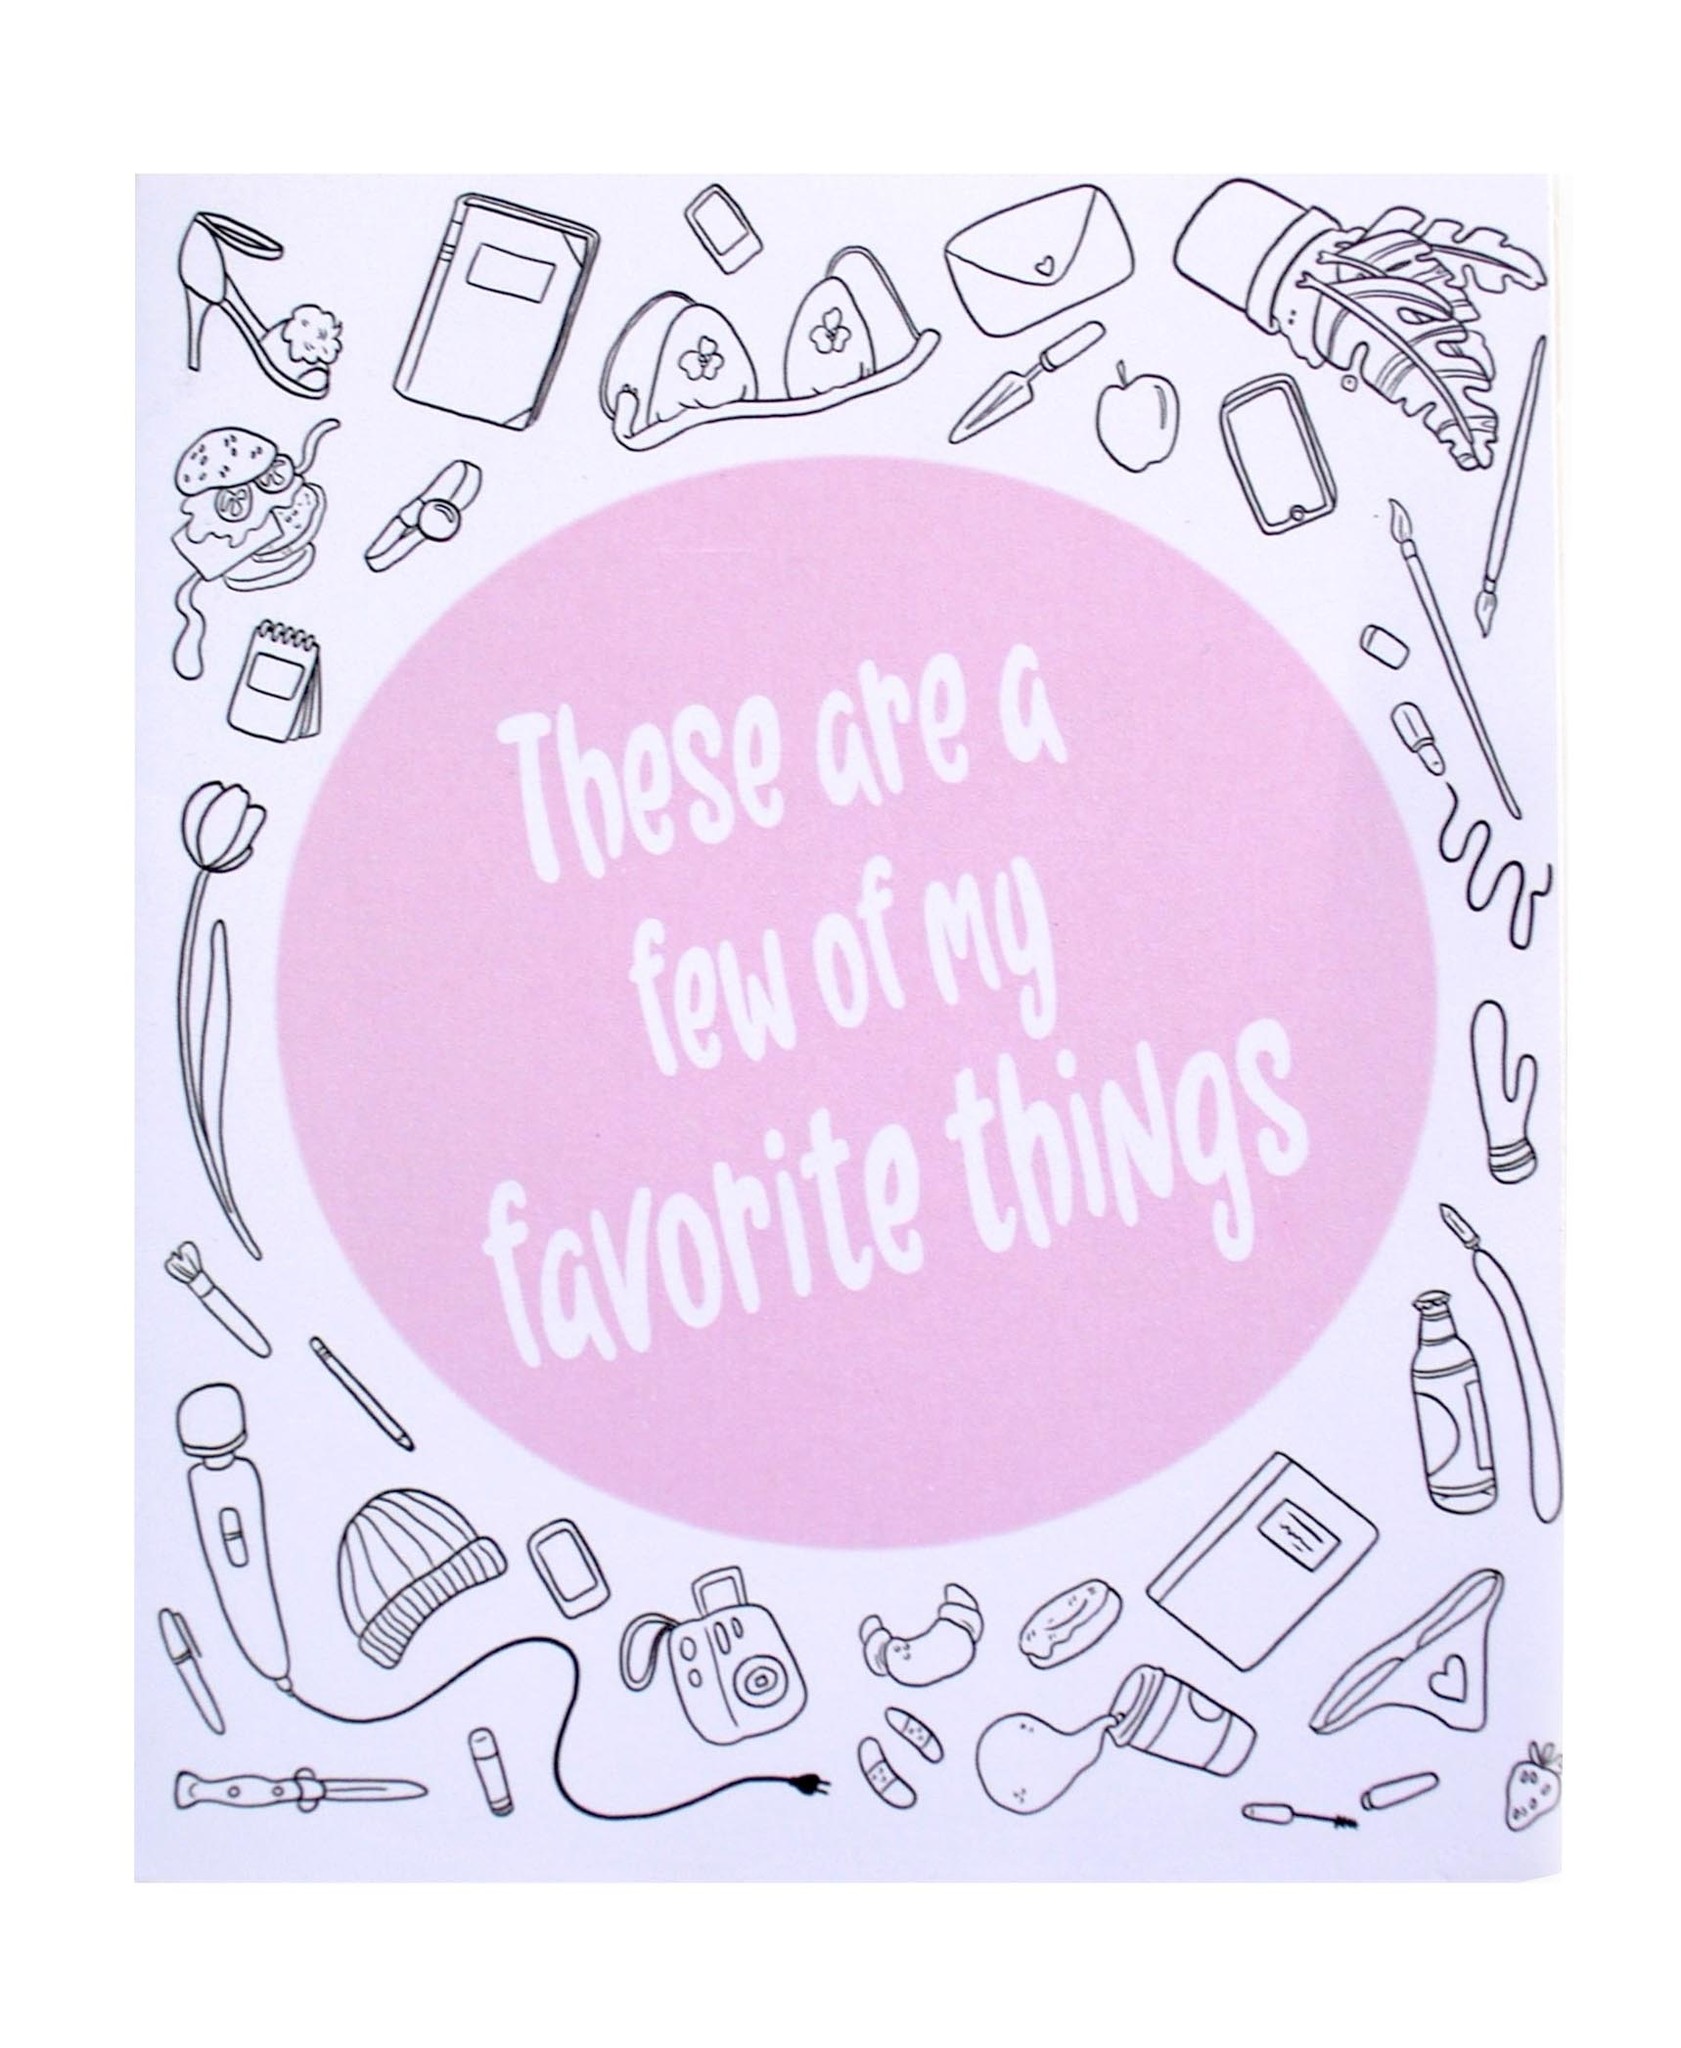 These Are A Few Of My Favorite Things. (GREETING CARD) – VERRIER